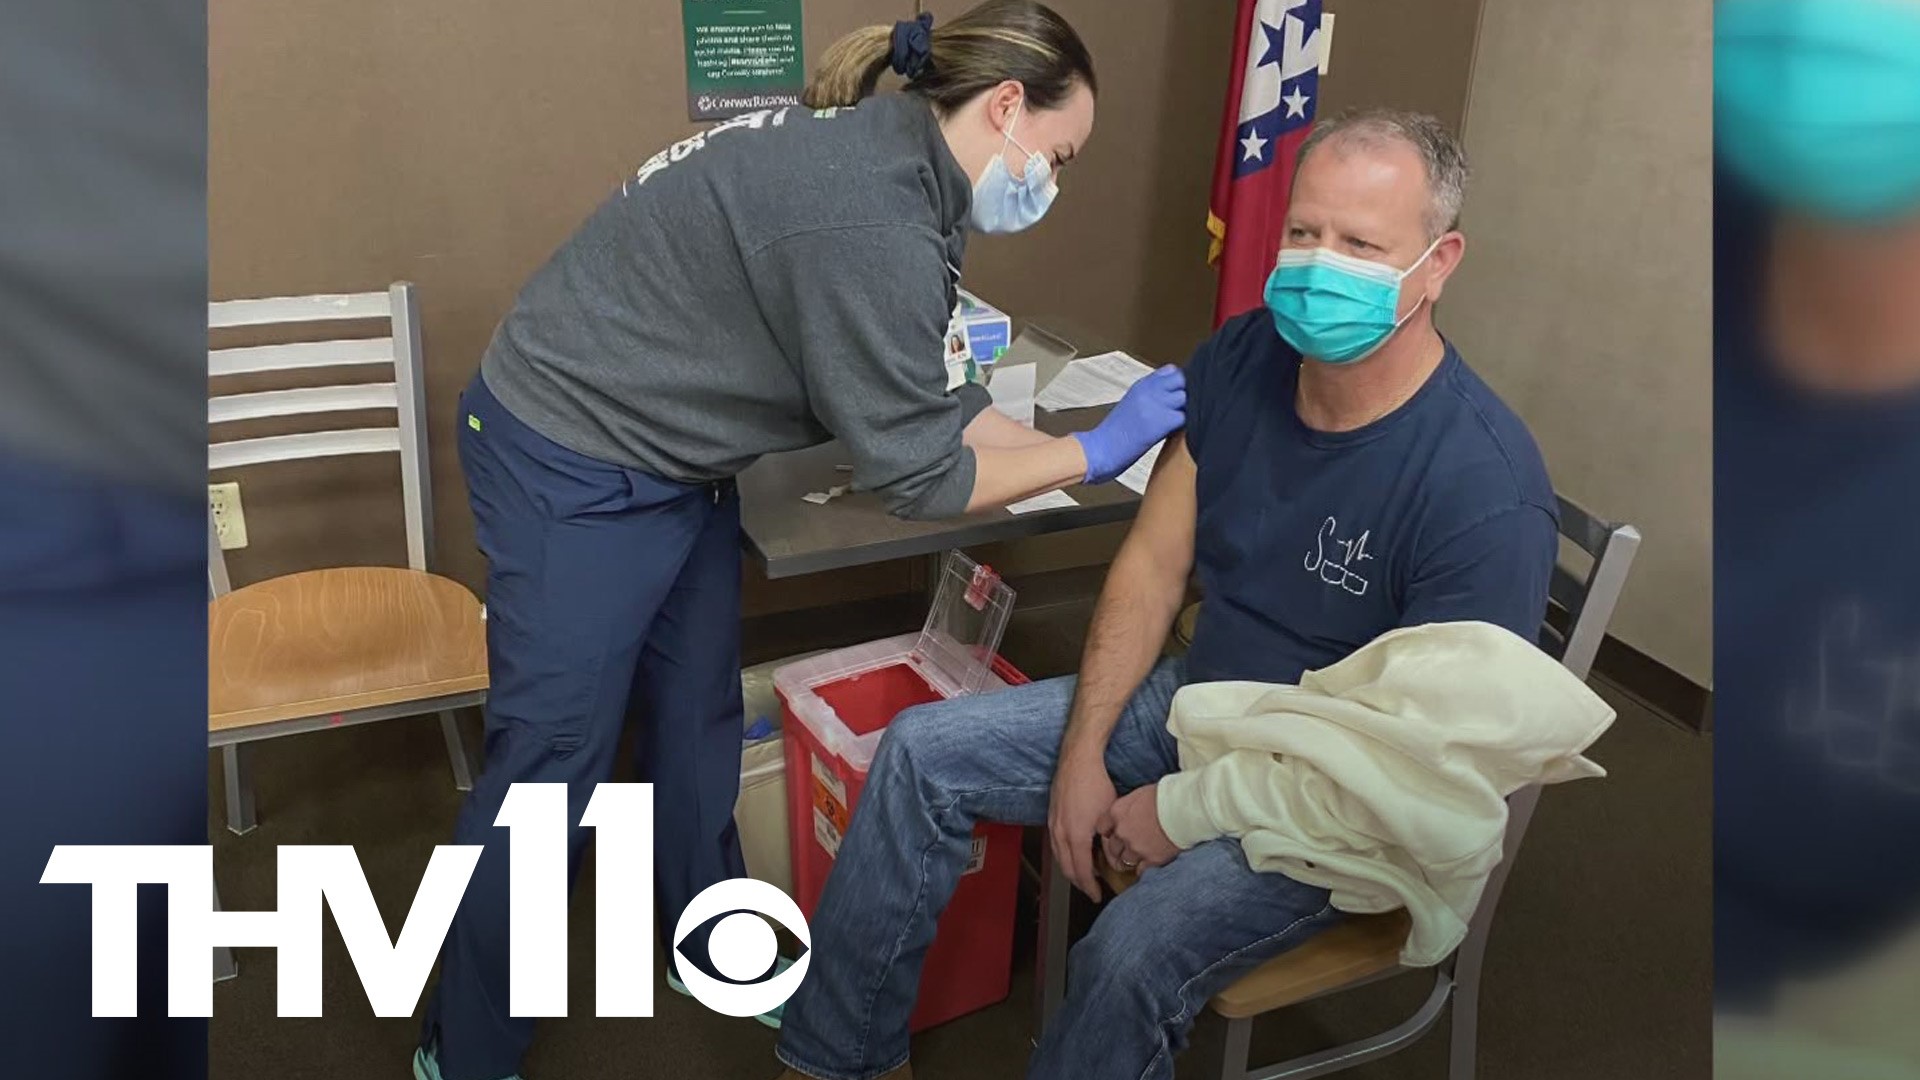 Healthcare workers and first responders continue to be vaccinated and that includes some fire departments in Arkansas.